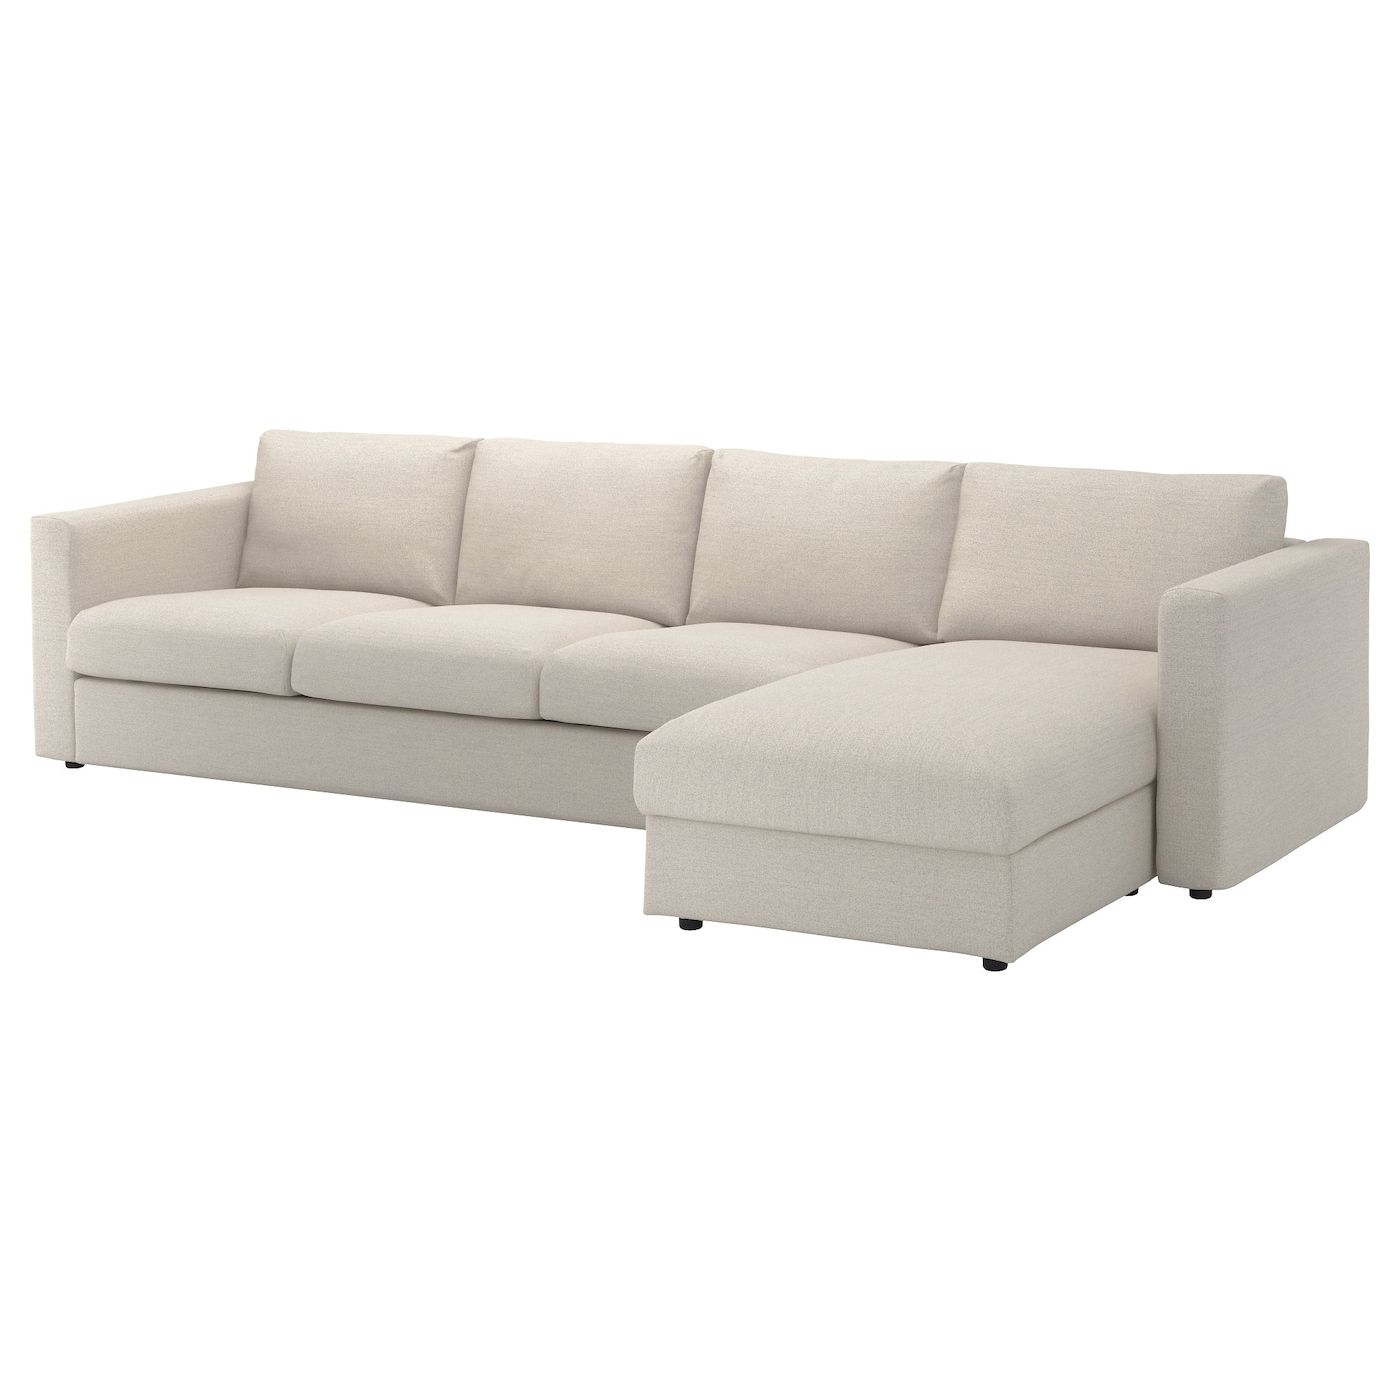 Vimle With Chaise Longue/Gunnared Beige, 4 Seat Sofa – Ikea Intended For 4 Seat Sofas (View 8 of 15)